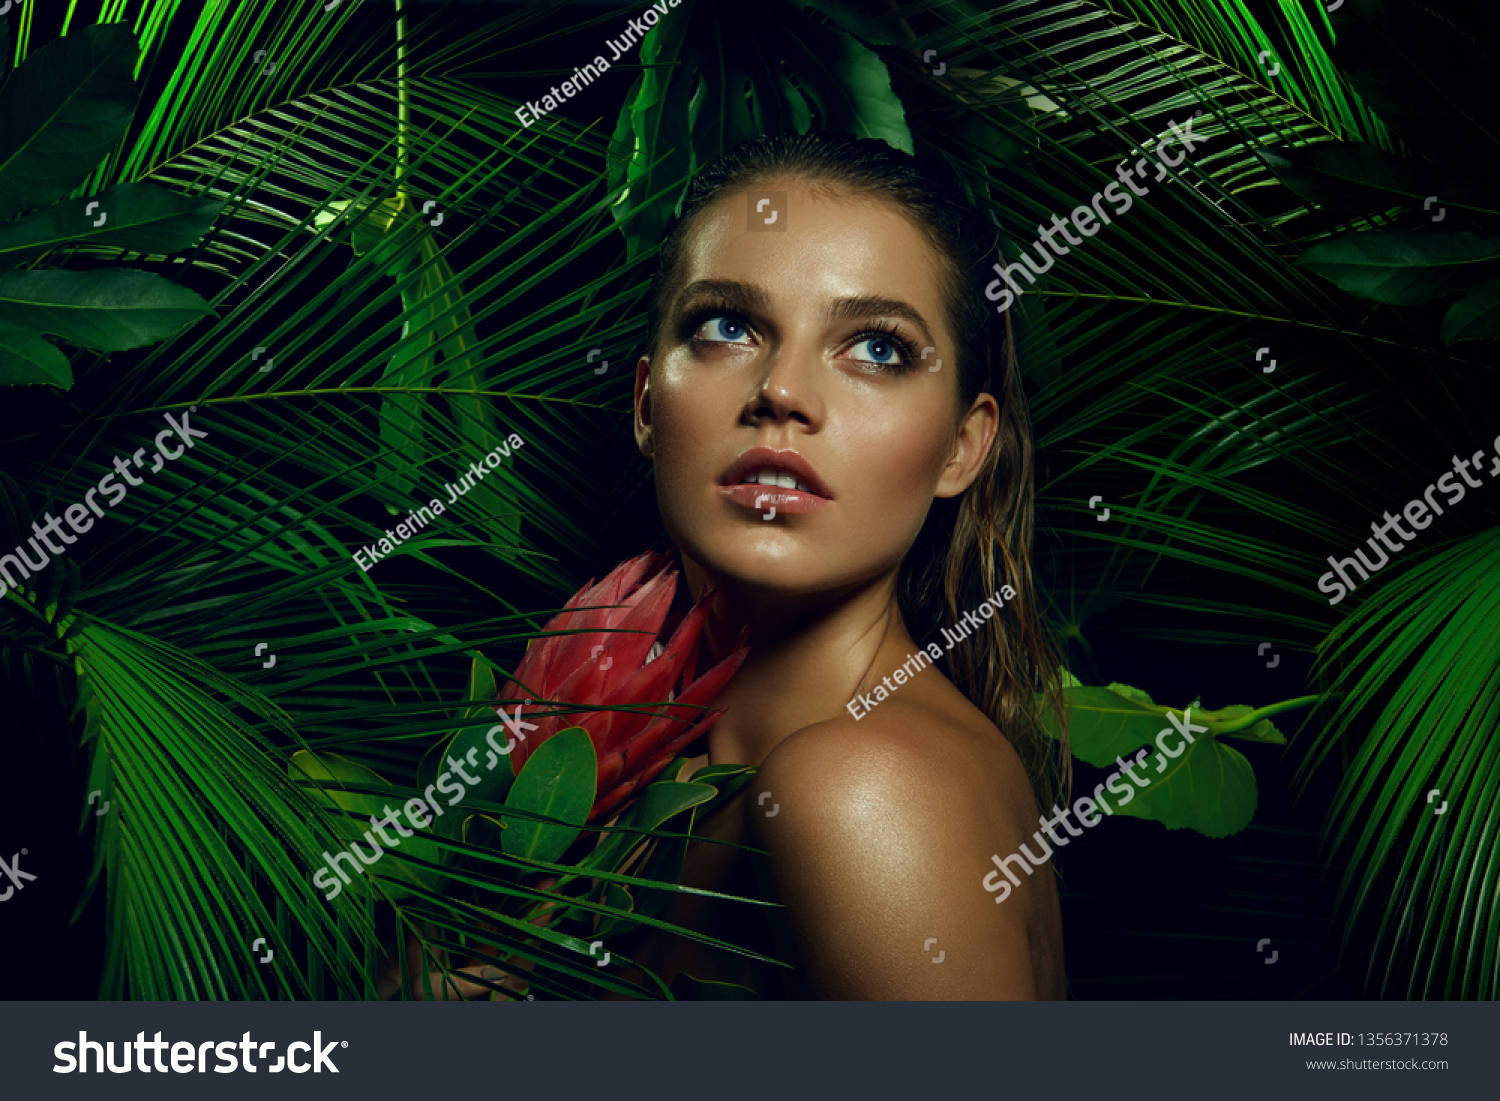 A beautiful tanned girl with natural make-up and wet hair stands in the jungle among exotic plants.fashion, beauty, makeup, cosmetics, beauty salon, style, personal care, posture, hair, hair. #1356371378